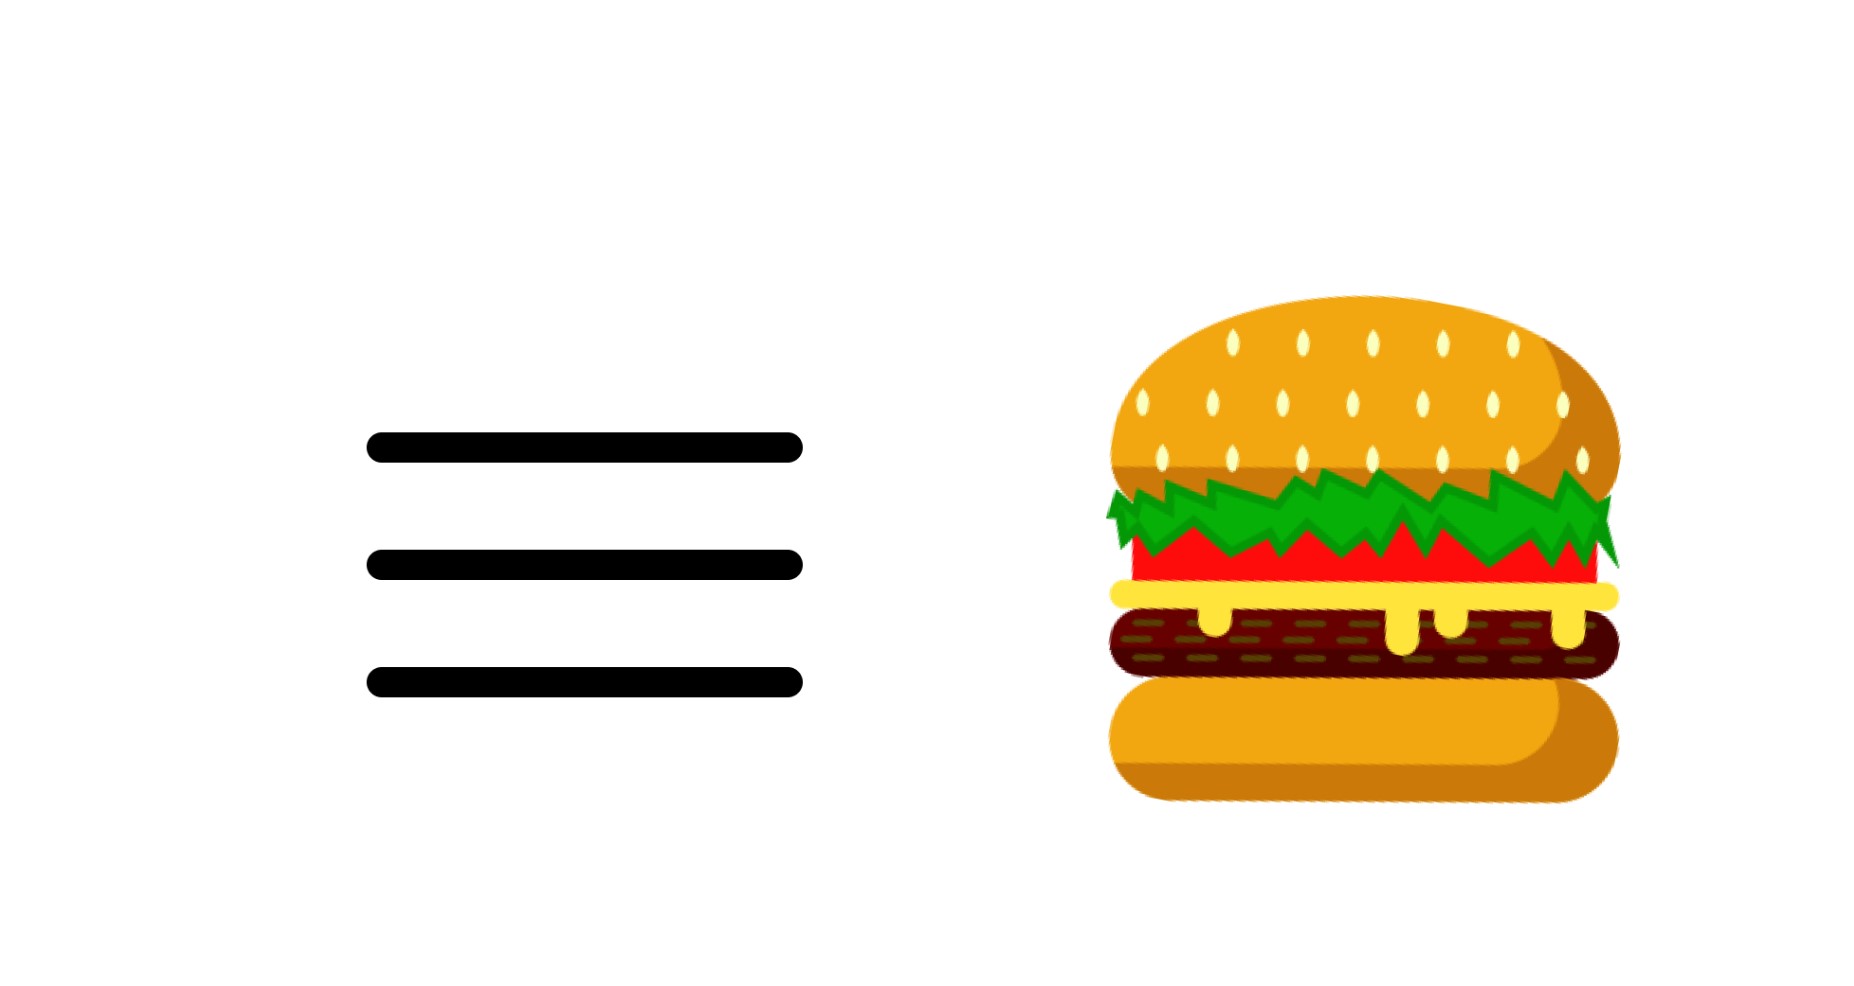 Understanding How Users Interact With Website Hamburger Menus: Insights From UX Studies